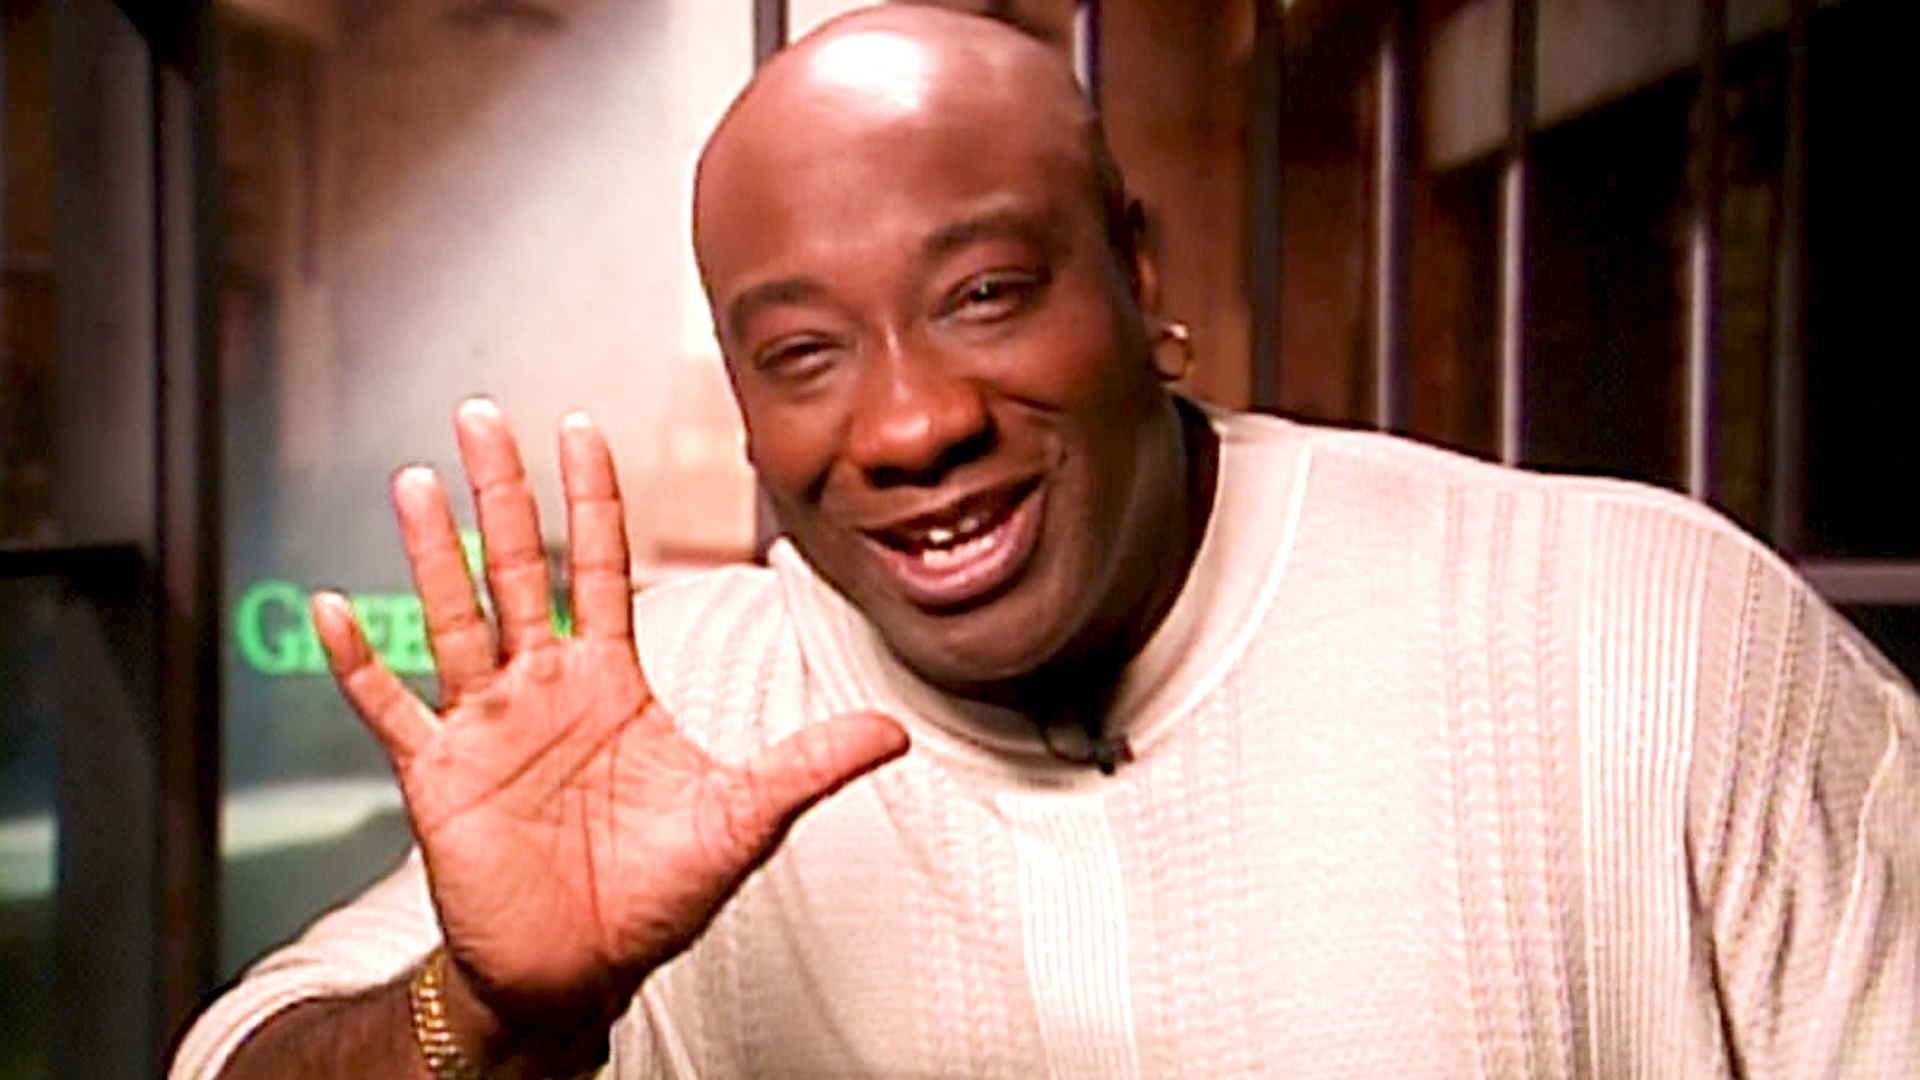 Michael Clarke Duncan sat down with WFAA to talk about taking on the role of John Coffey in the 1999 film The Green Mile.